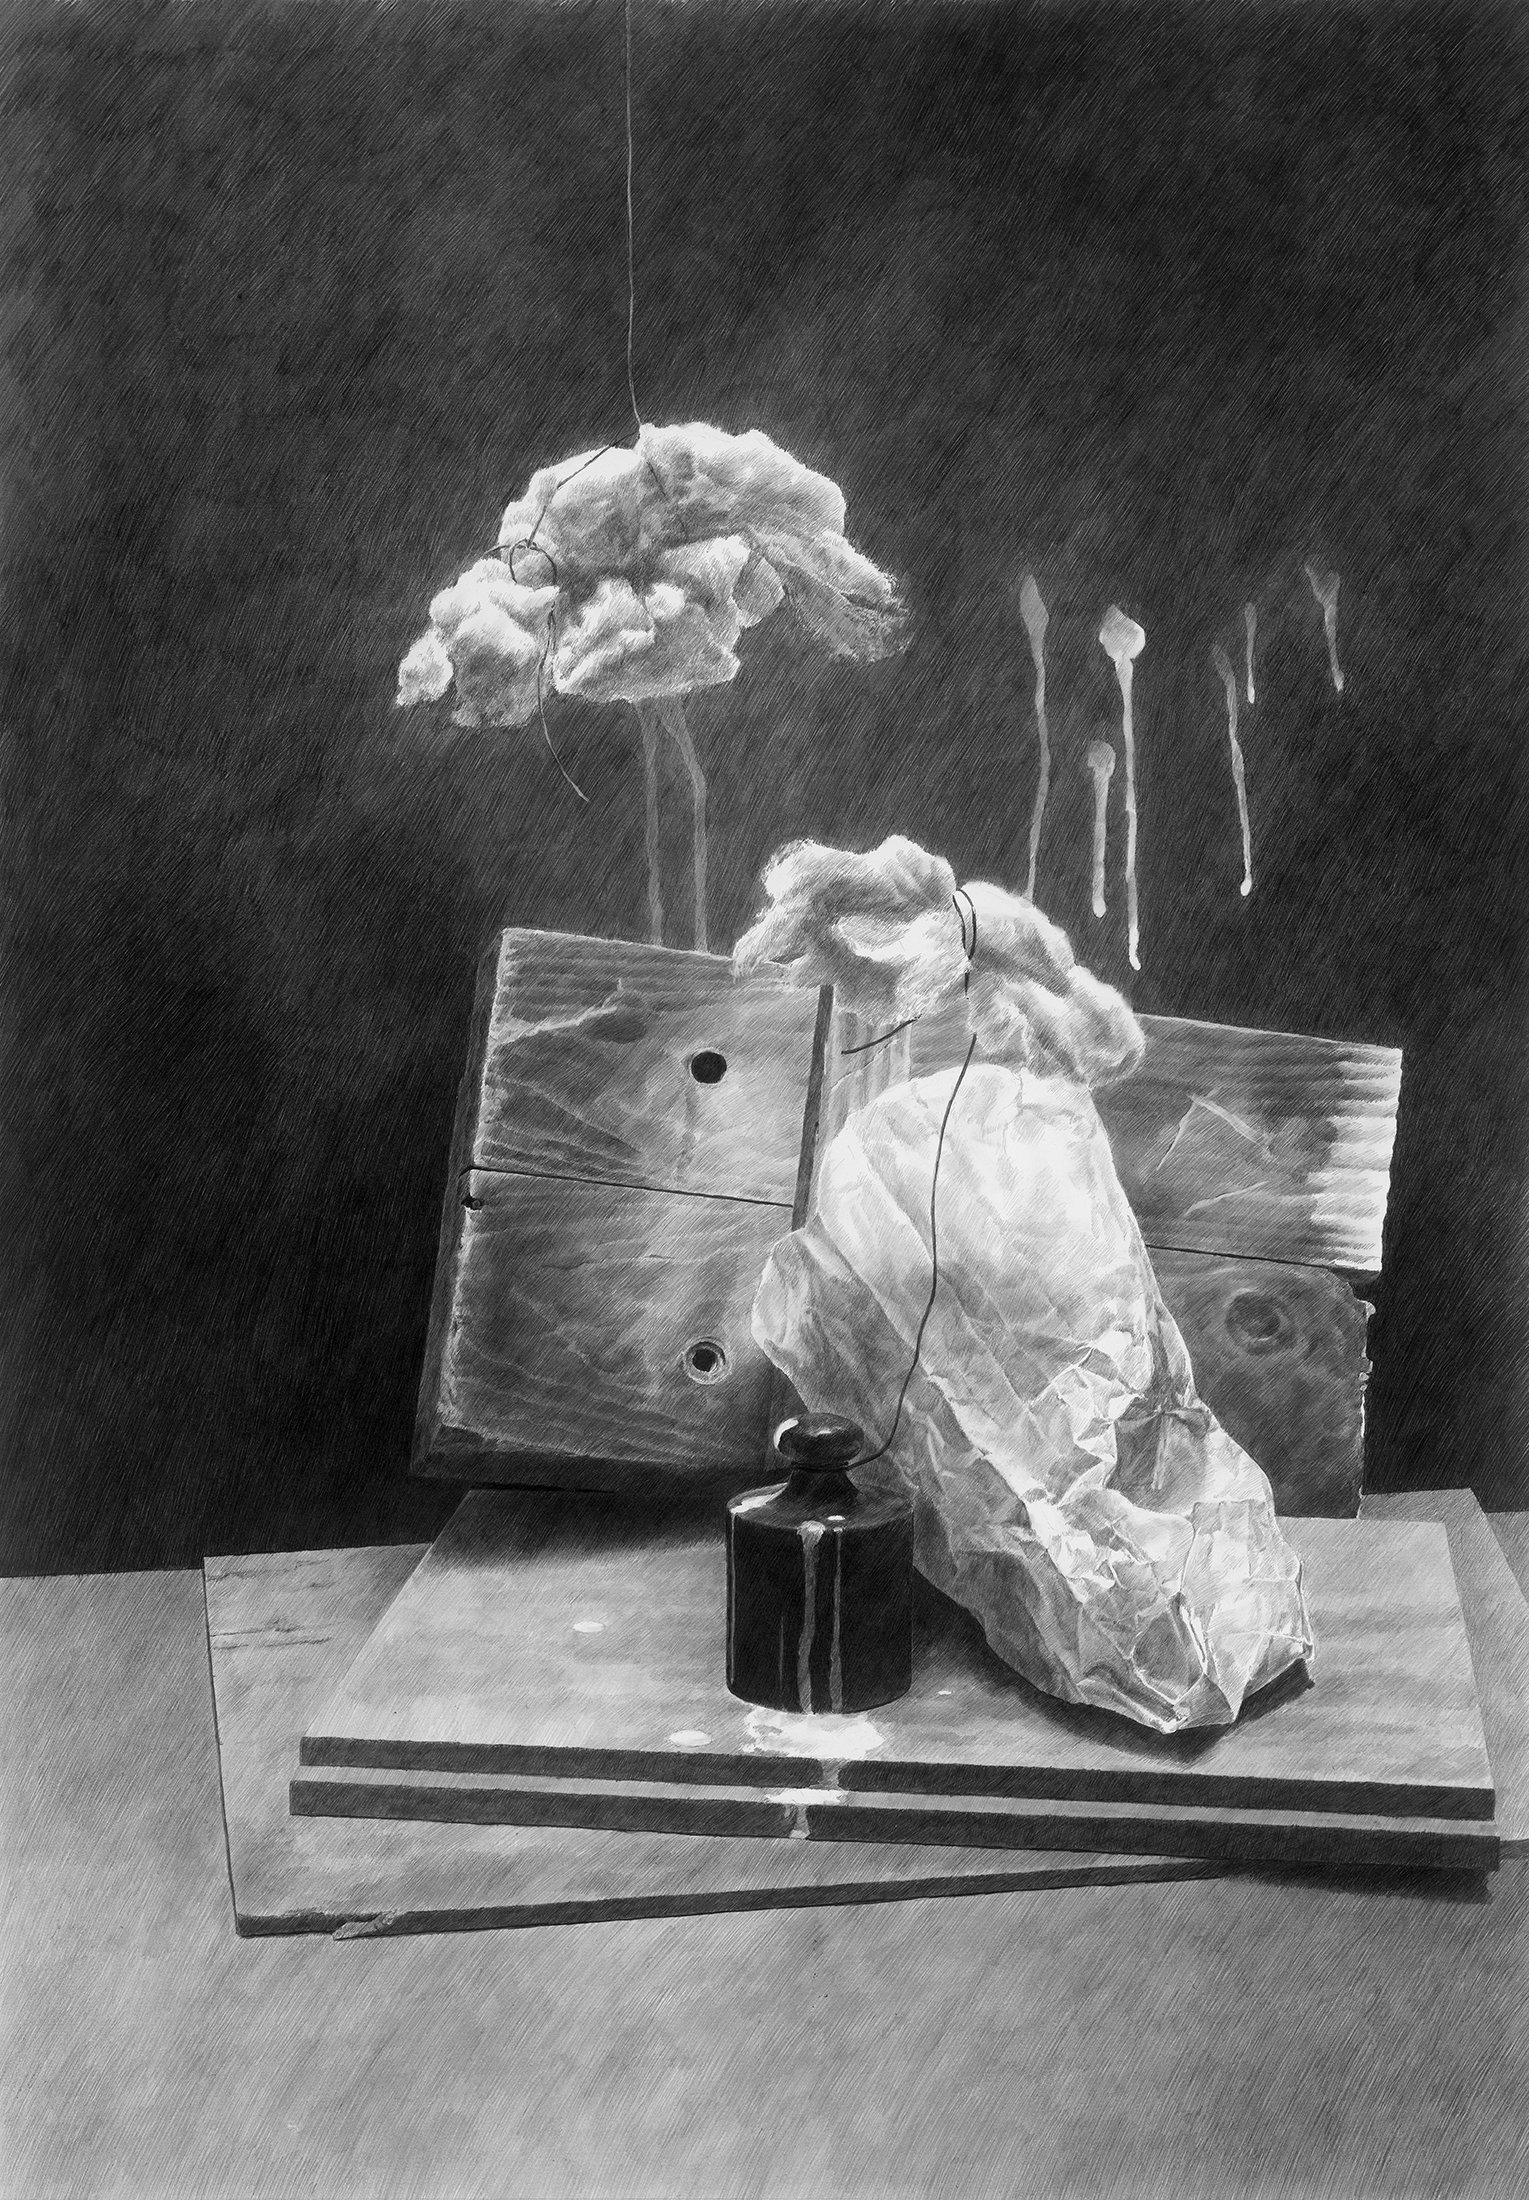 A Pinch of Cloudiness, graphite 0.3-0.7 on paper, 530mm x 760mm, 2022 - original drawing available for: 503.000 HUF; fine art print for: 302.000 HUF